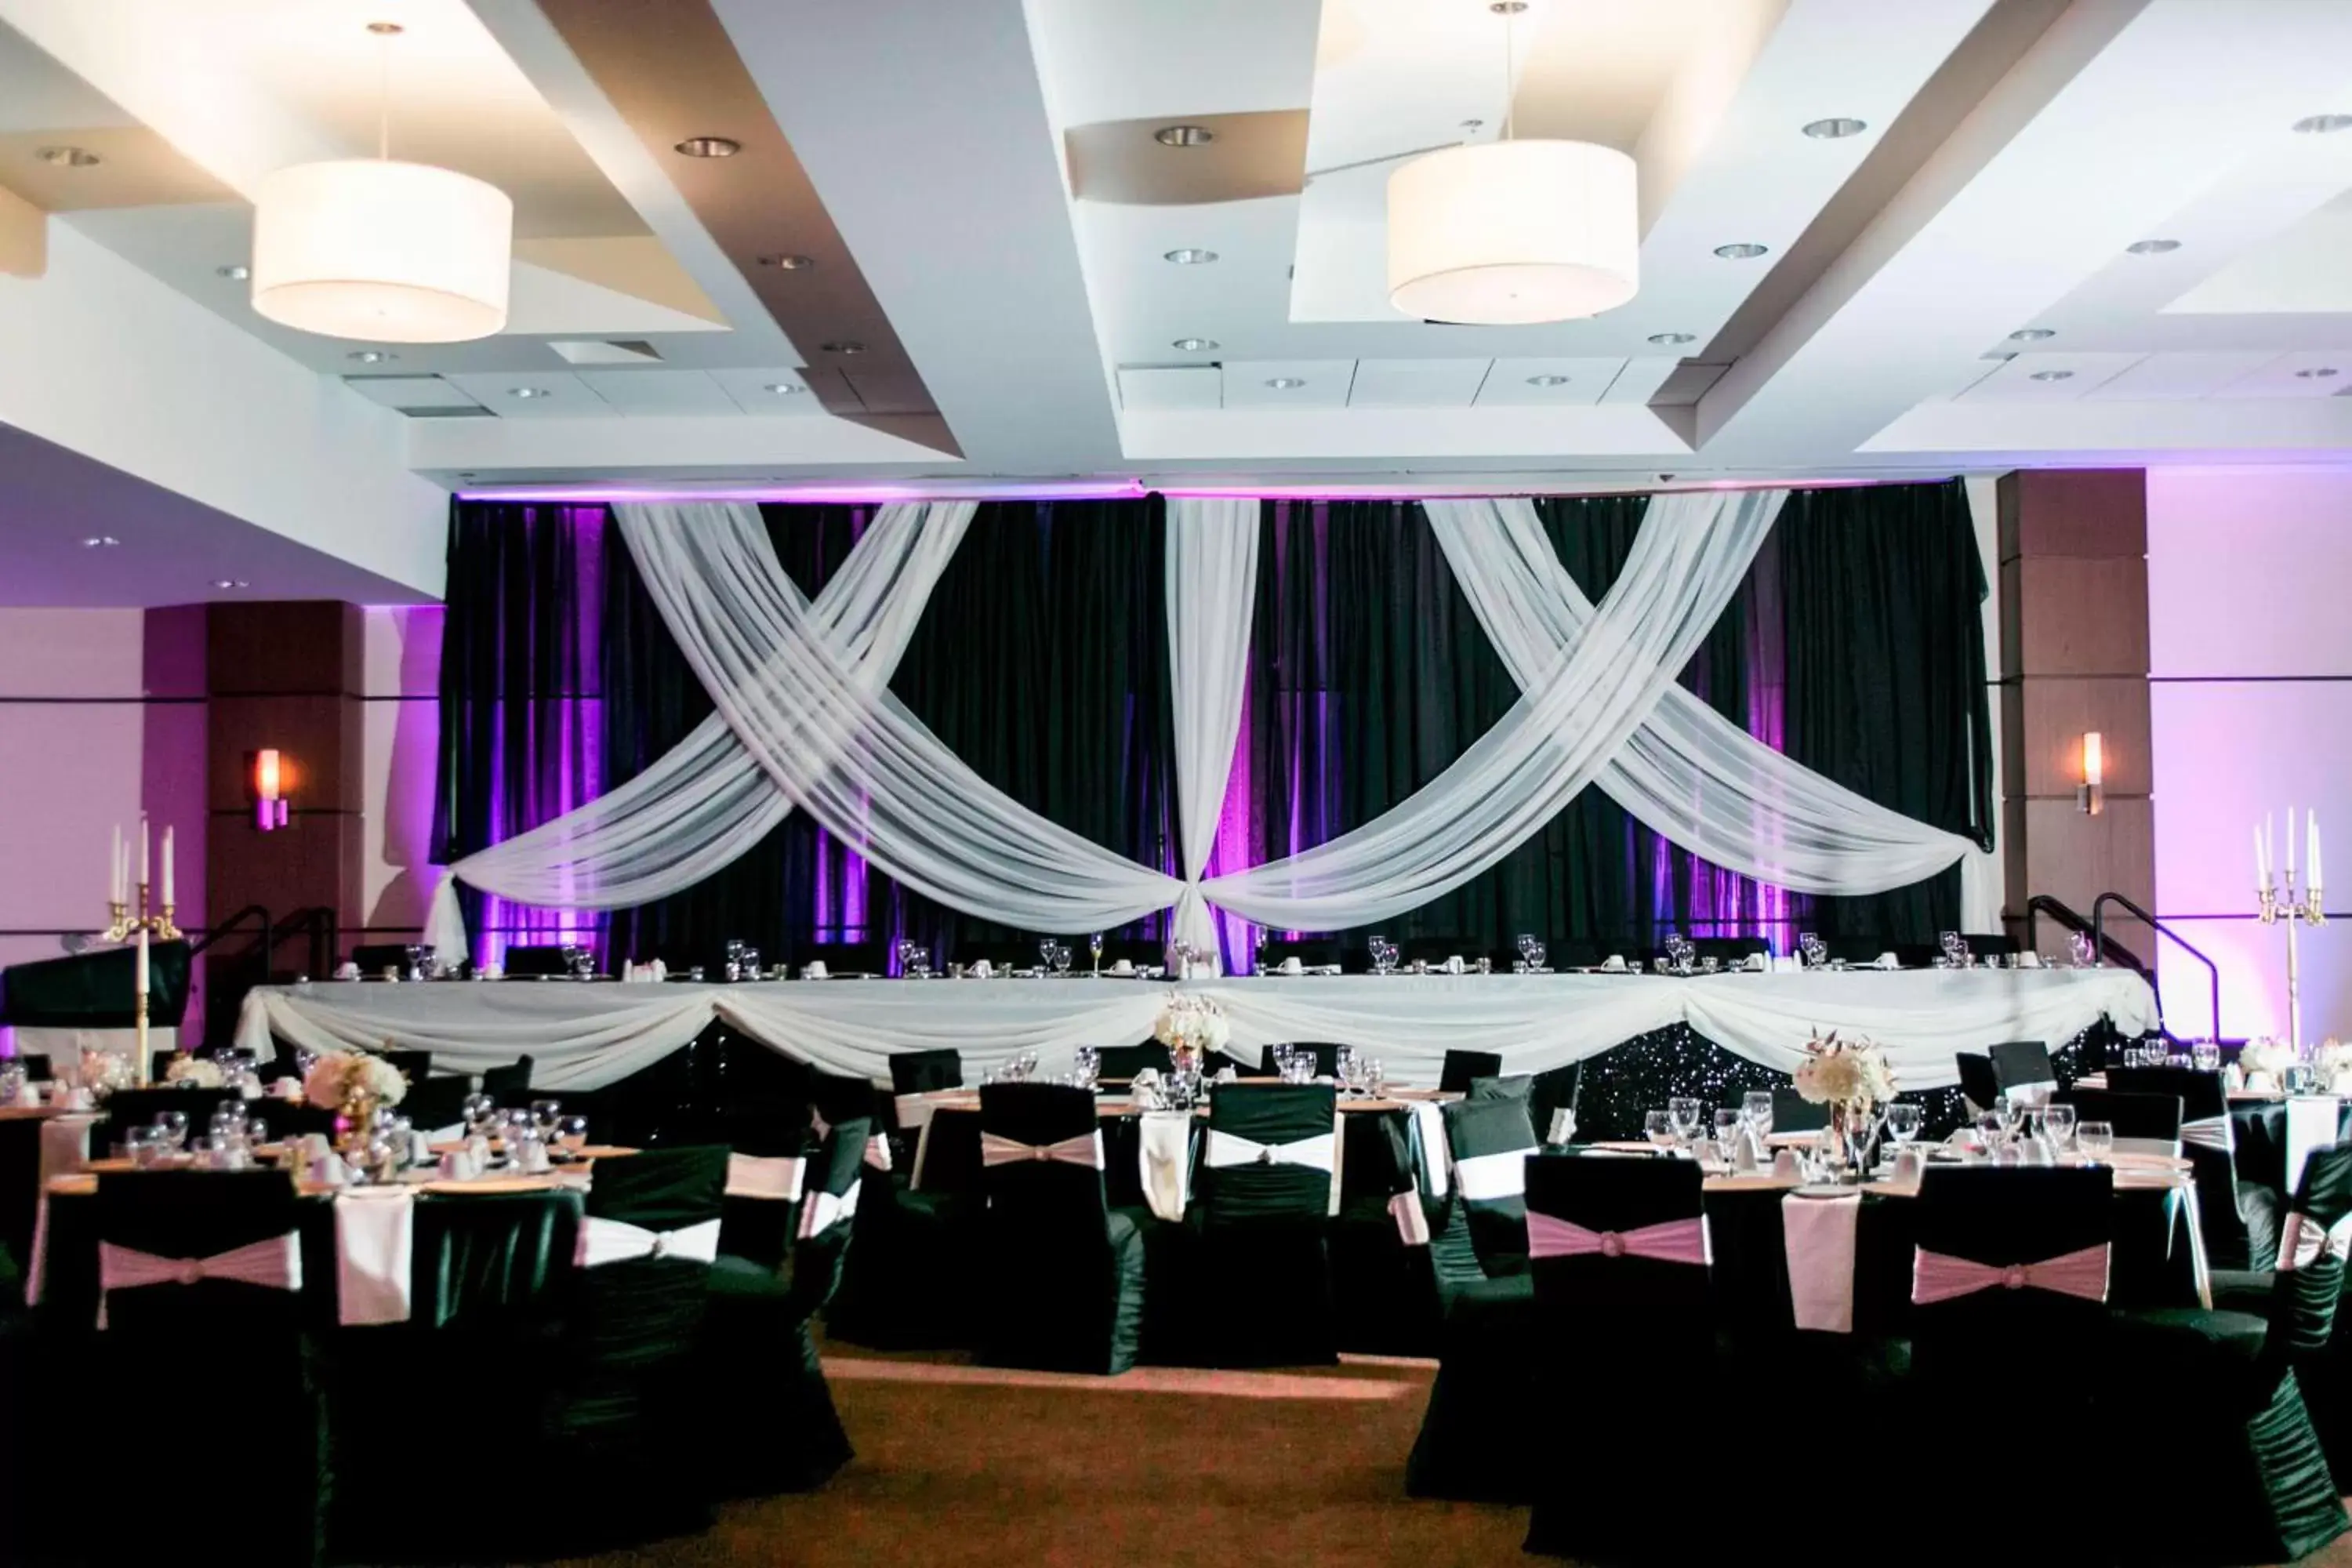 Banquet/Function facilities, Banquet Facilities in Four Points by Sheraton Winnipeg South